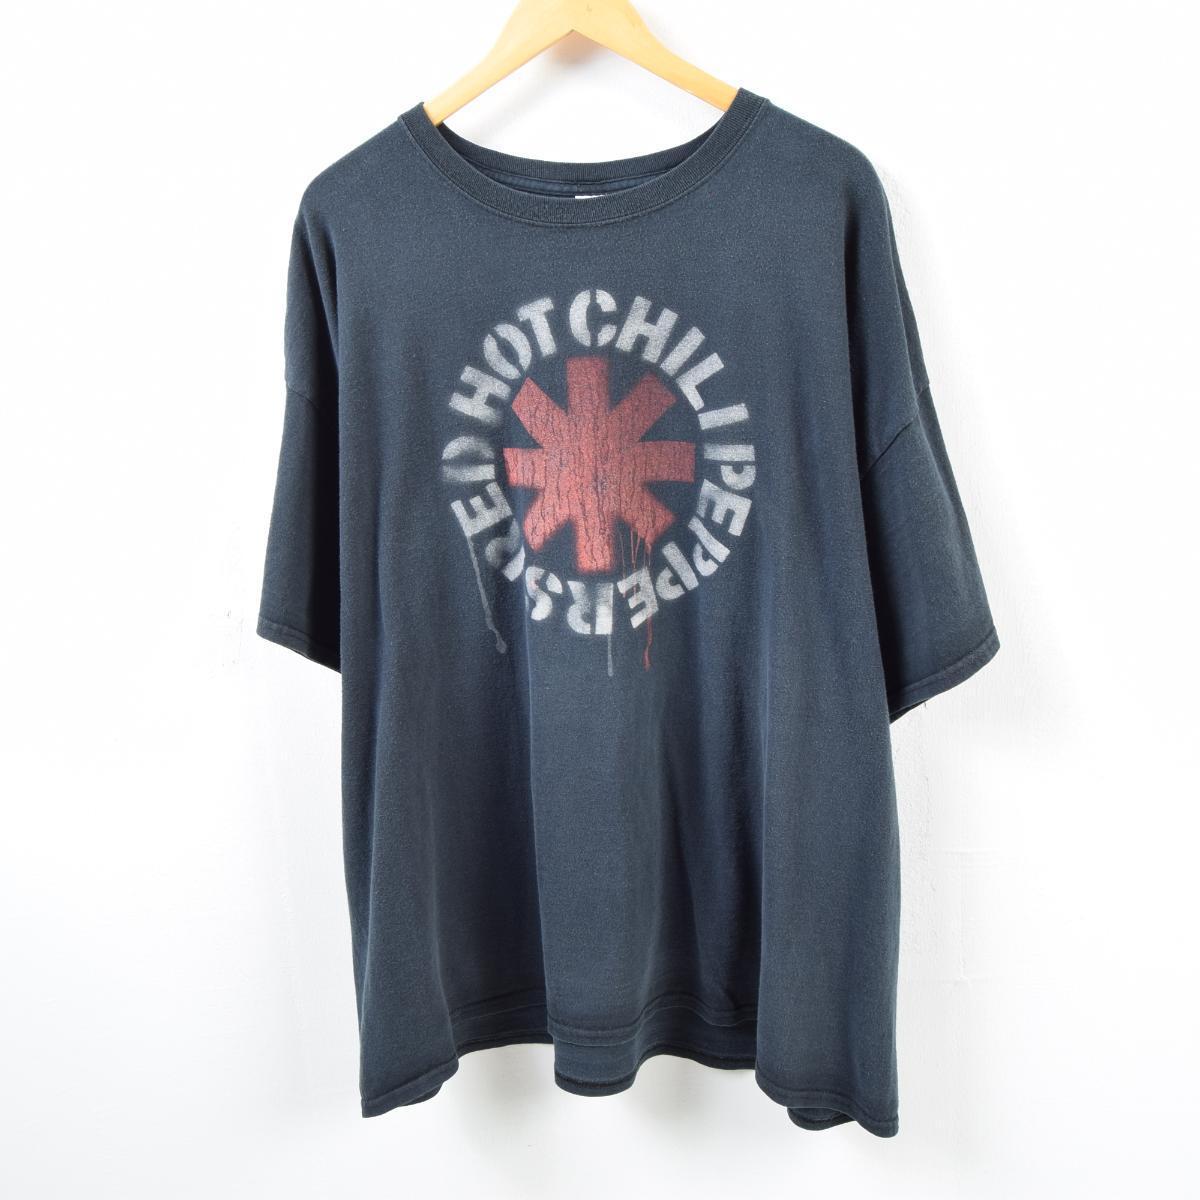 RED HOT CHILIPEPPERS（レッドホットチリペッパーズ）Tシャツ　古着　ヴィンテージ　長袖